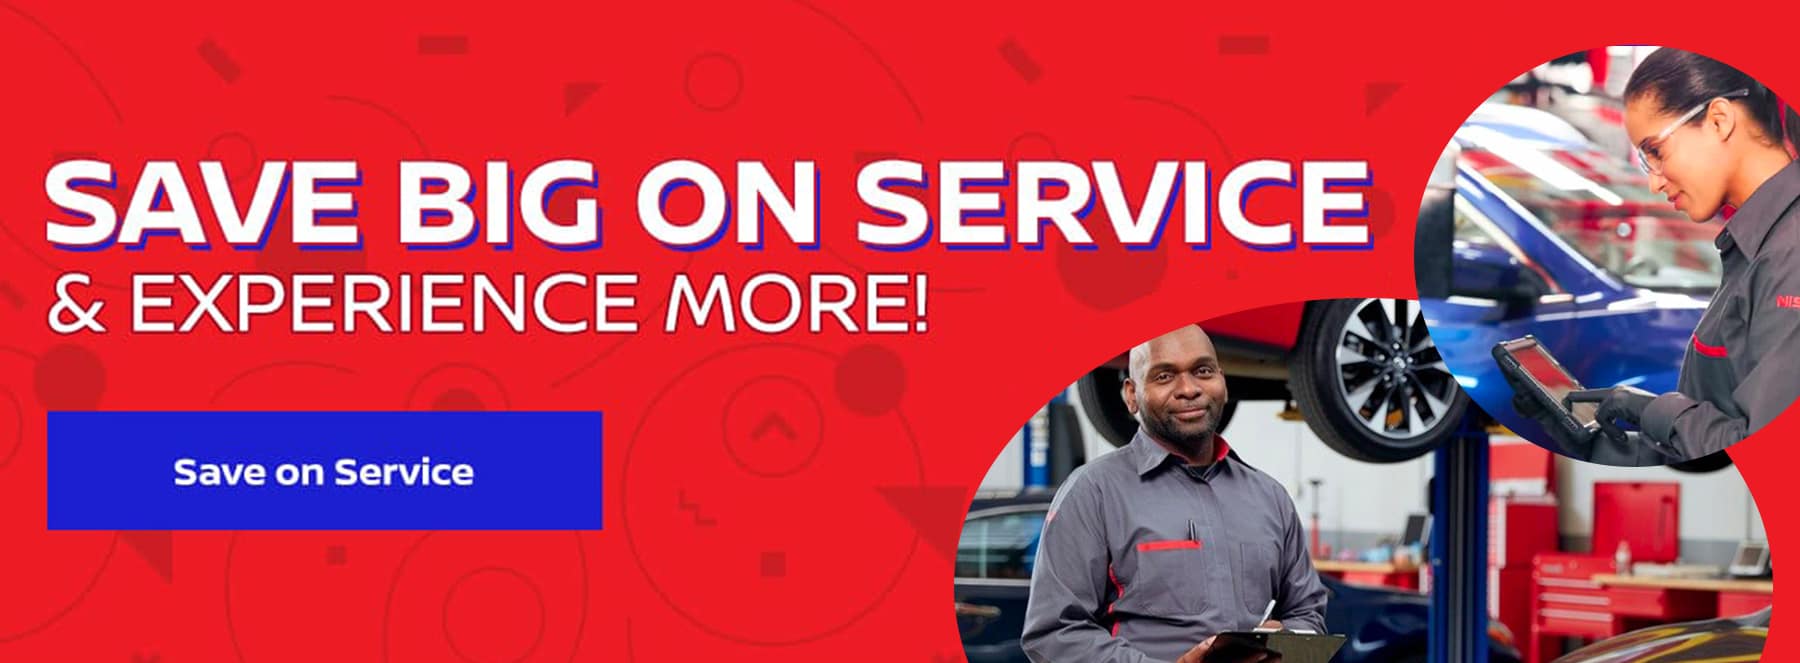 June Save on Service